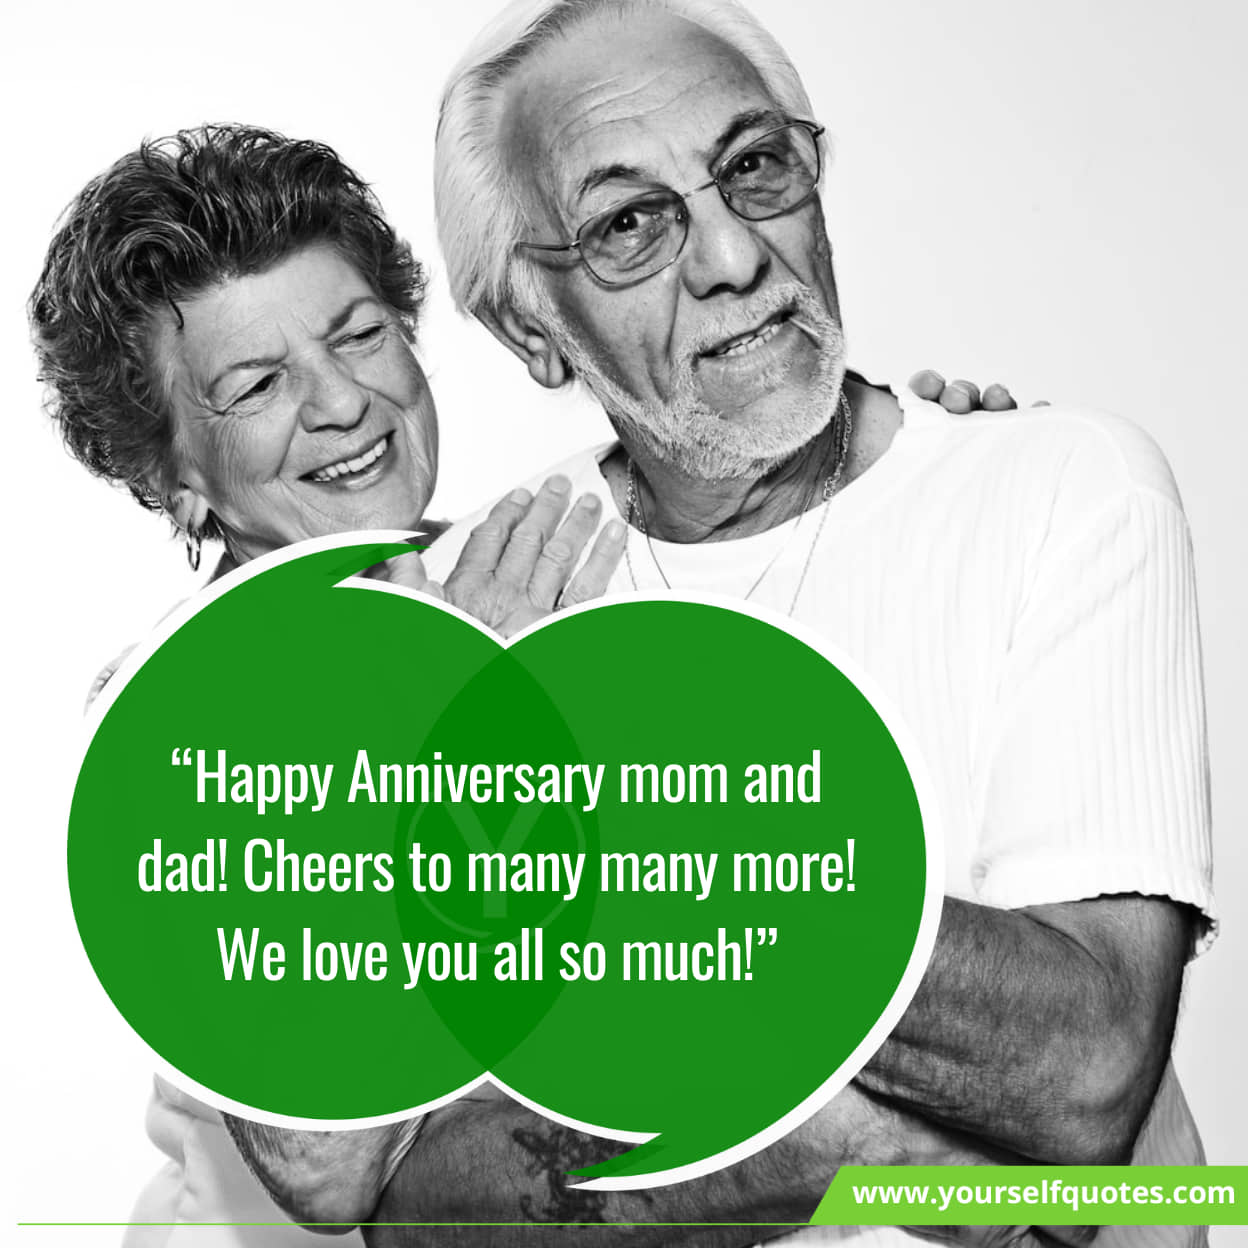 Happy Anniversary Wishes for My Parents' Golden Anniversary